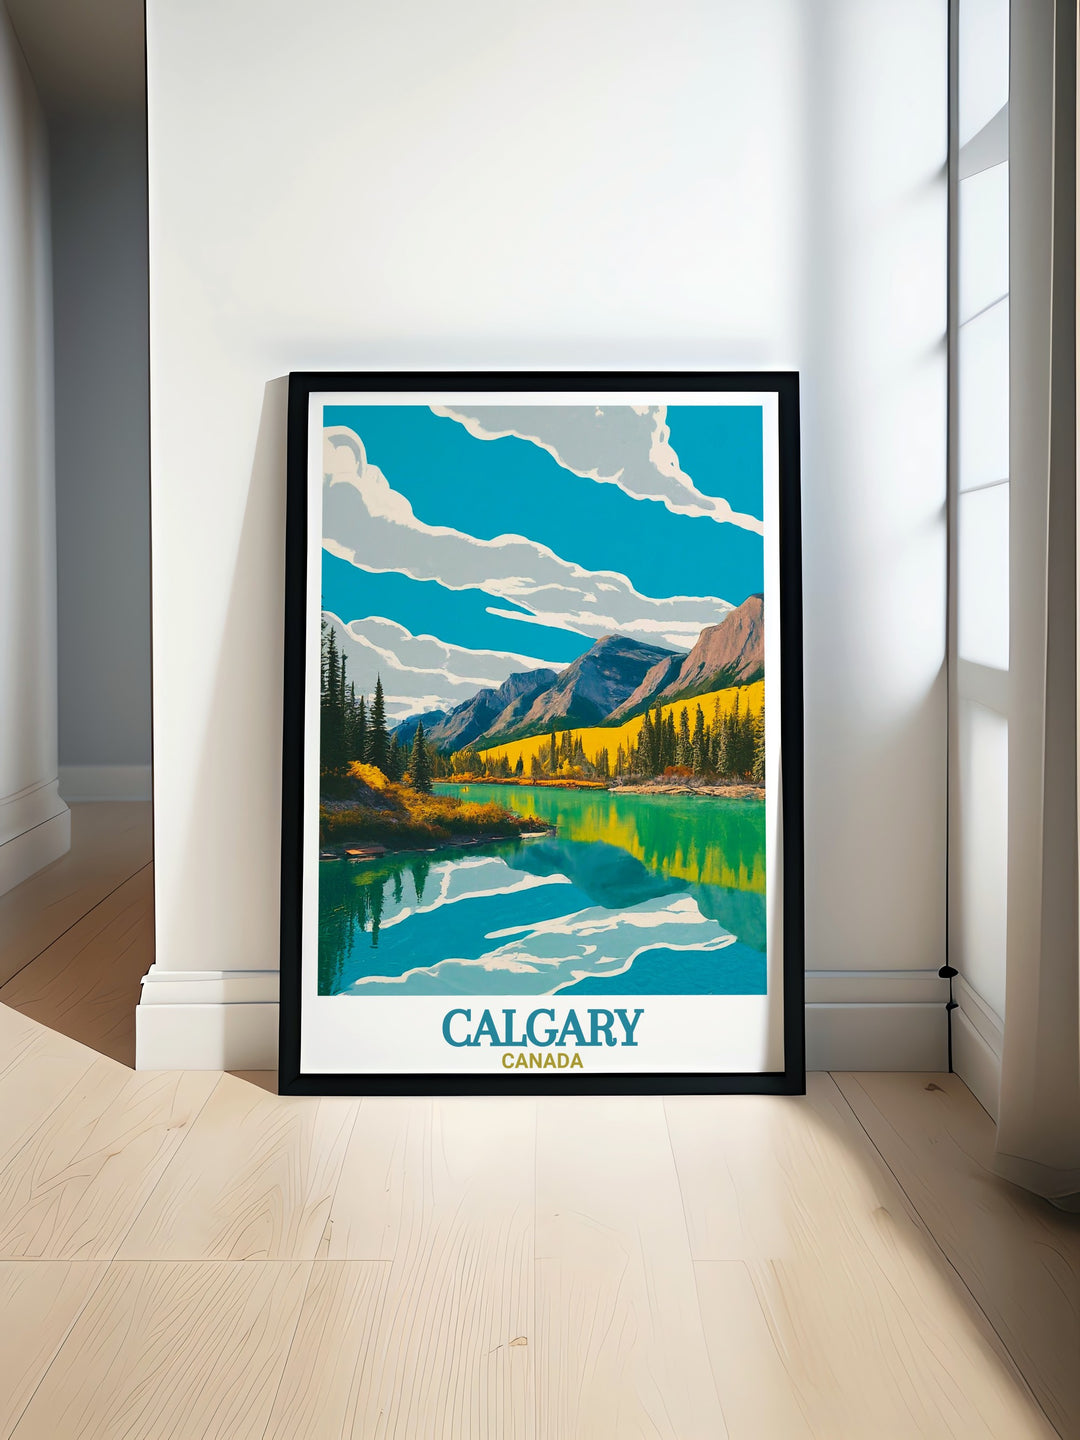 Discover the serene beauty of Fish Creek Provincial Park with this stunning travel poster perfect for any Canada wall art collection. Featuring lush greenery and tranquil landscapes this print brings the peacefulness of nature into your home.